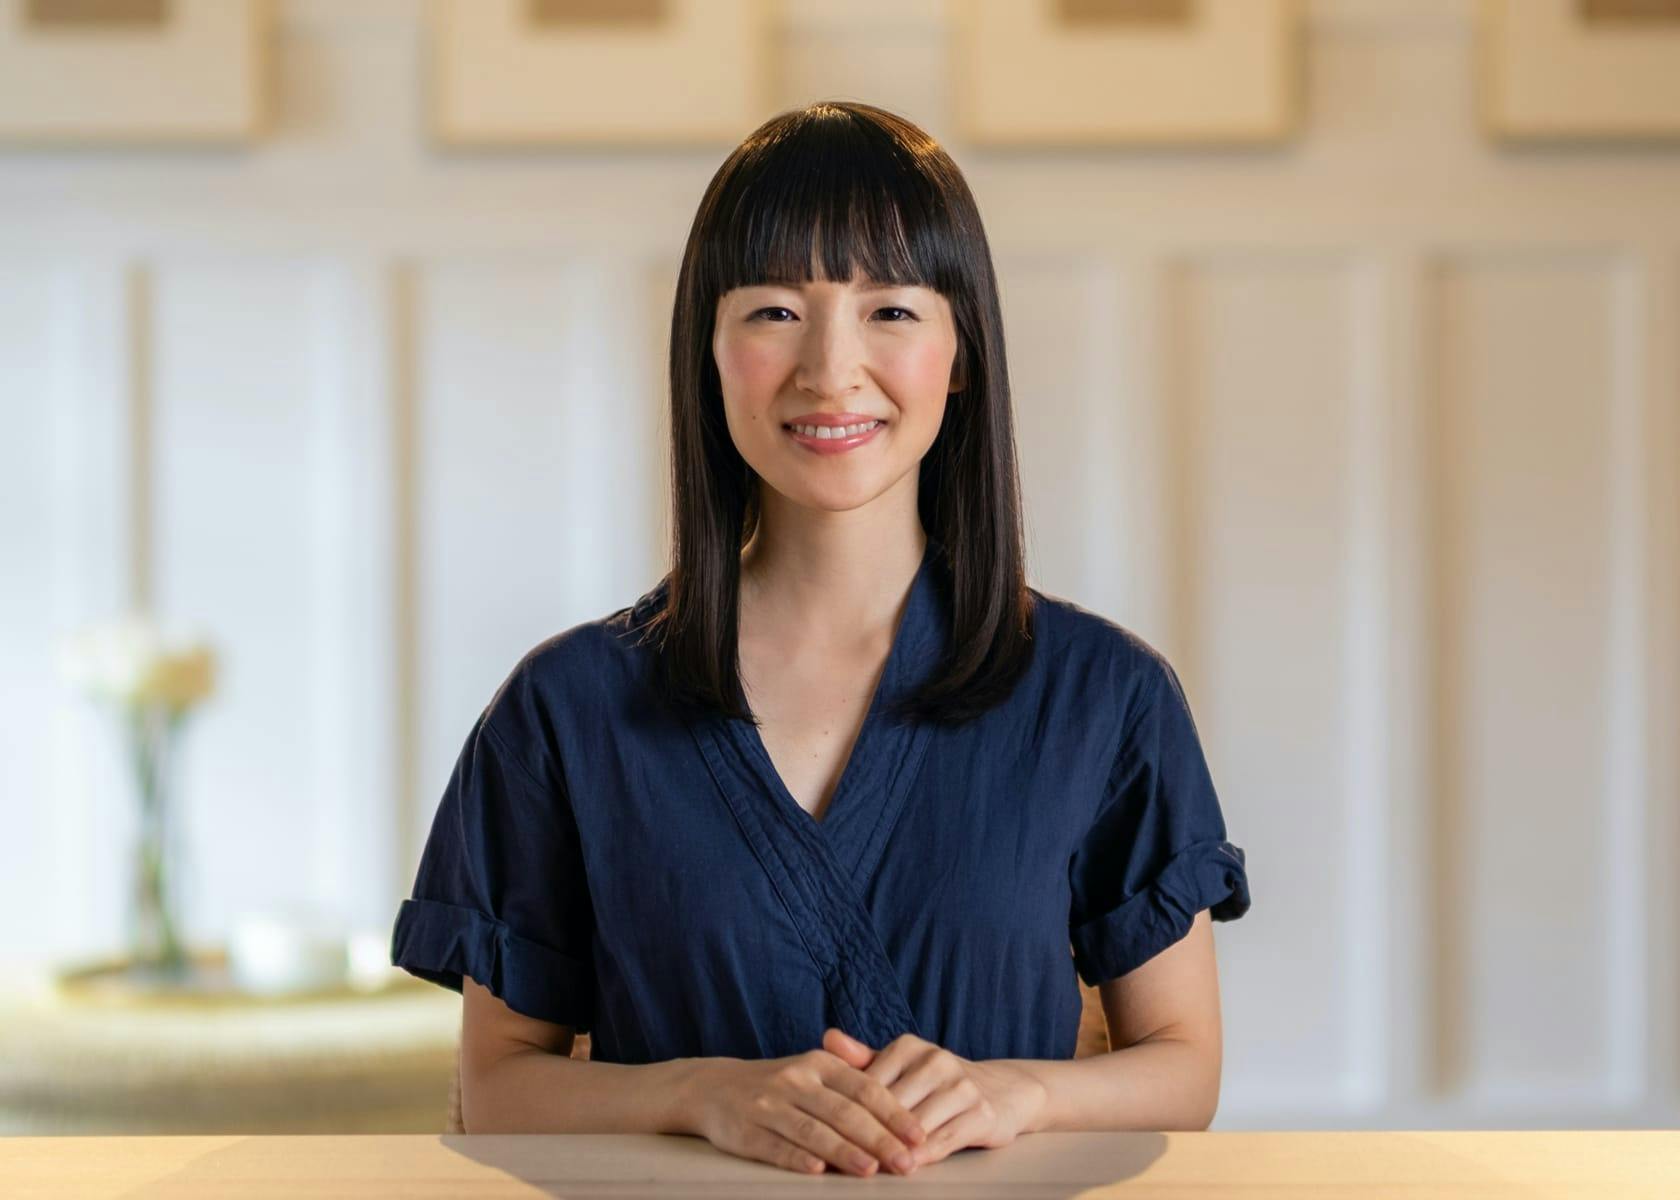 Marie Kondo sits at a wooden table with her hands folded in front of her, smiling. She wears a navy blue top and her cheeks are rosy.